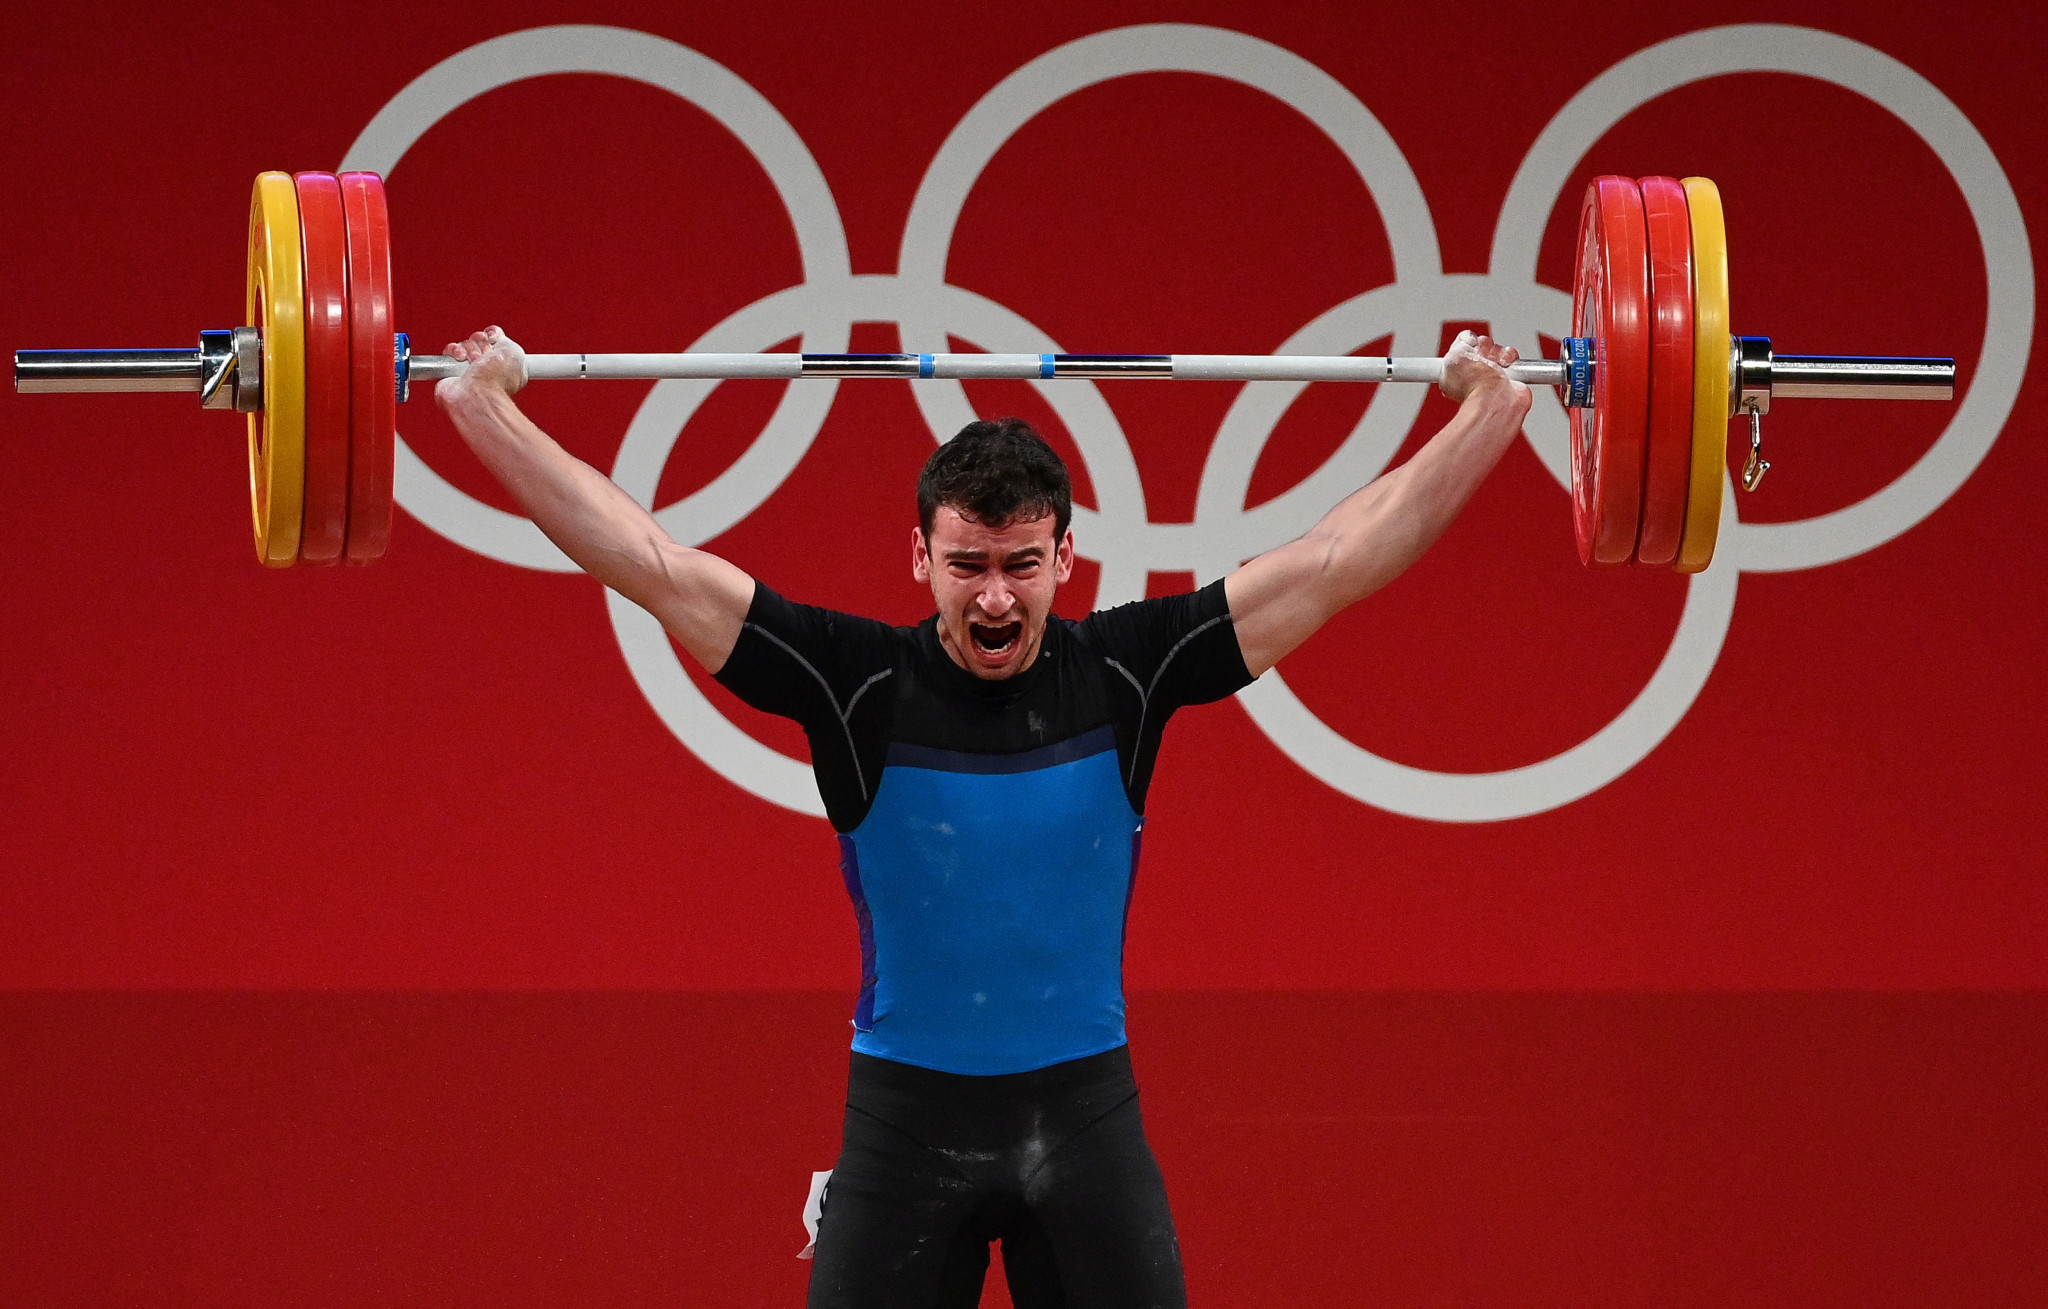 Conflitti's influence in reforming Moldovan weightlifting is evidenced by the bronze medal at the World Championships for Marin Robu ©Getty Images 